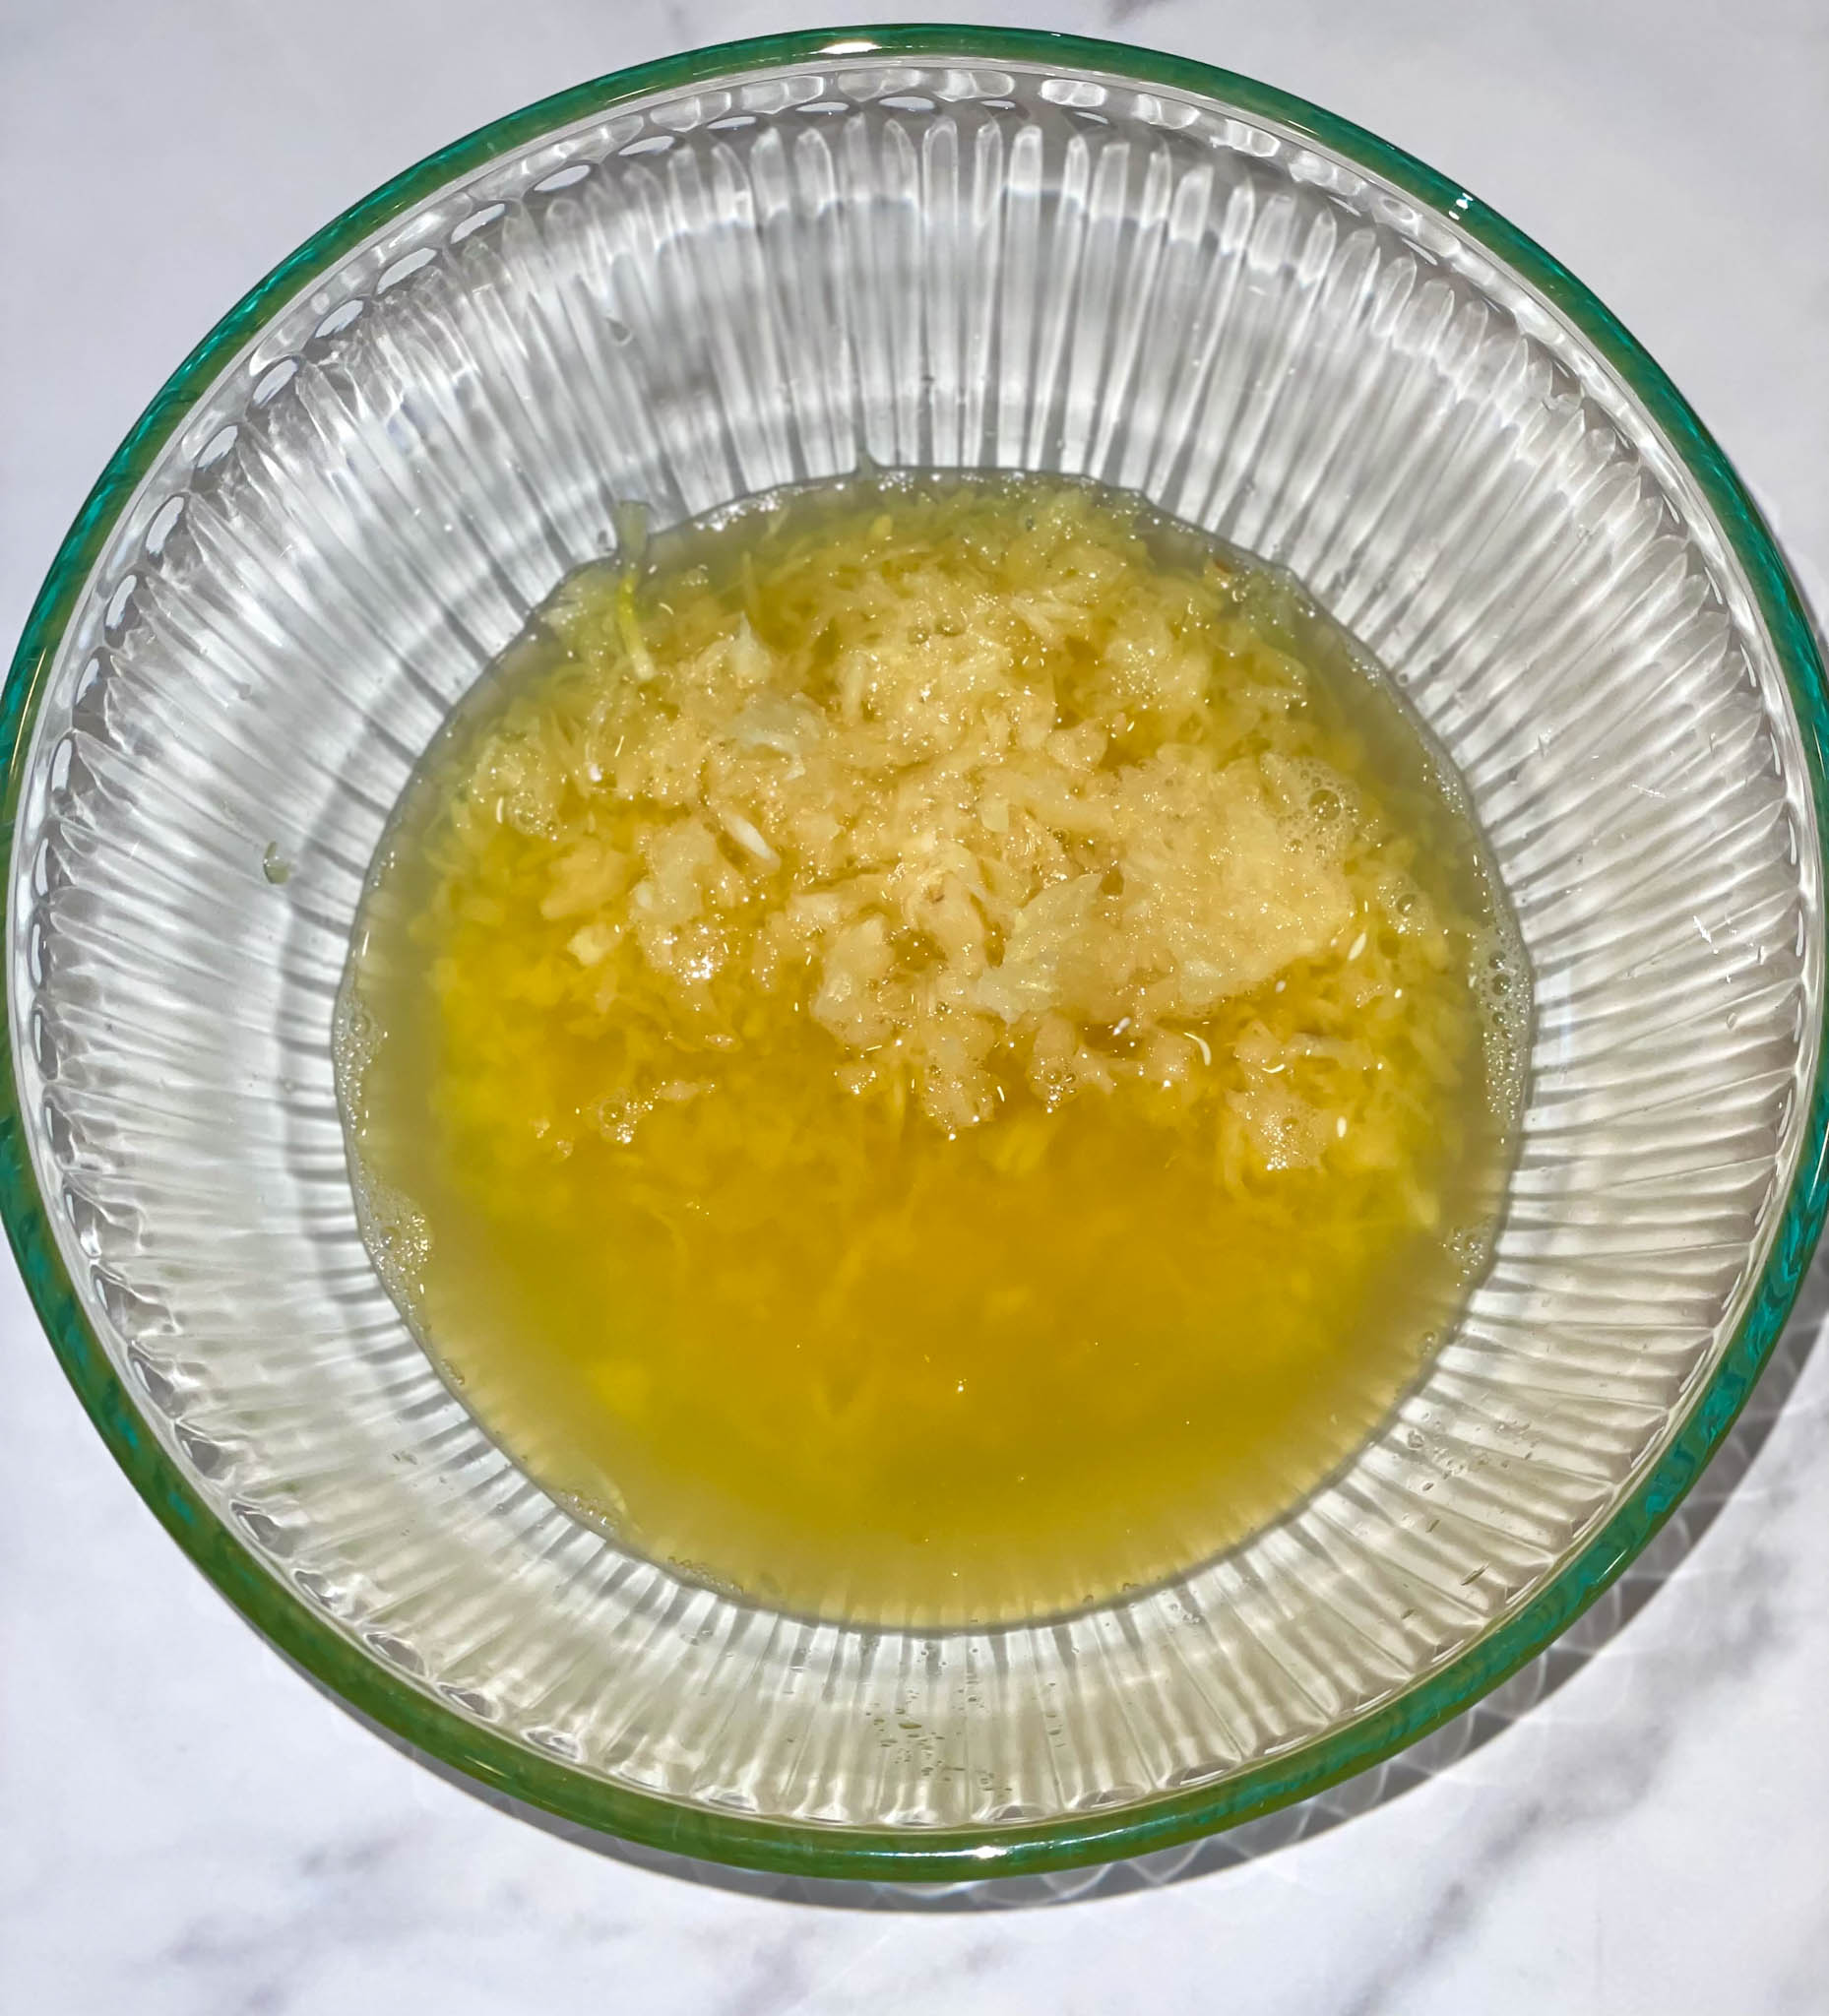 A marinade consisting of naranja agria, lime juice, garlic and salt for pollo in a glass bowl on a white background.